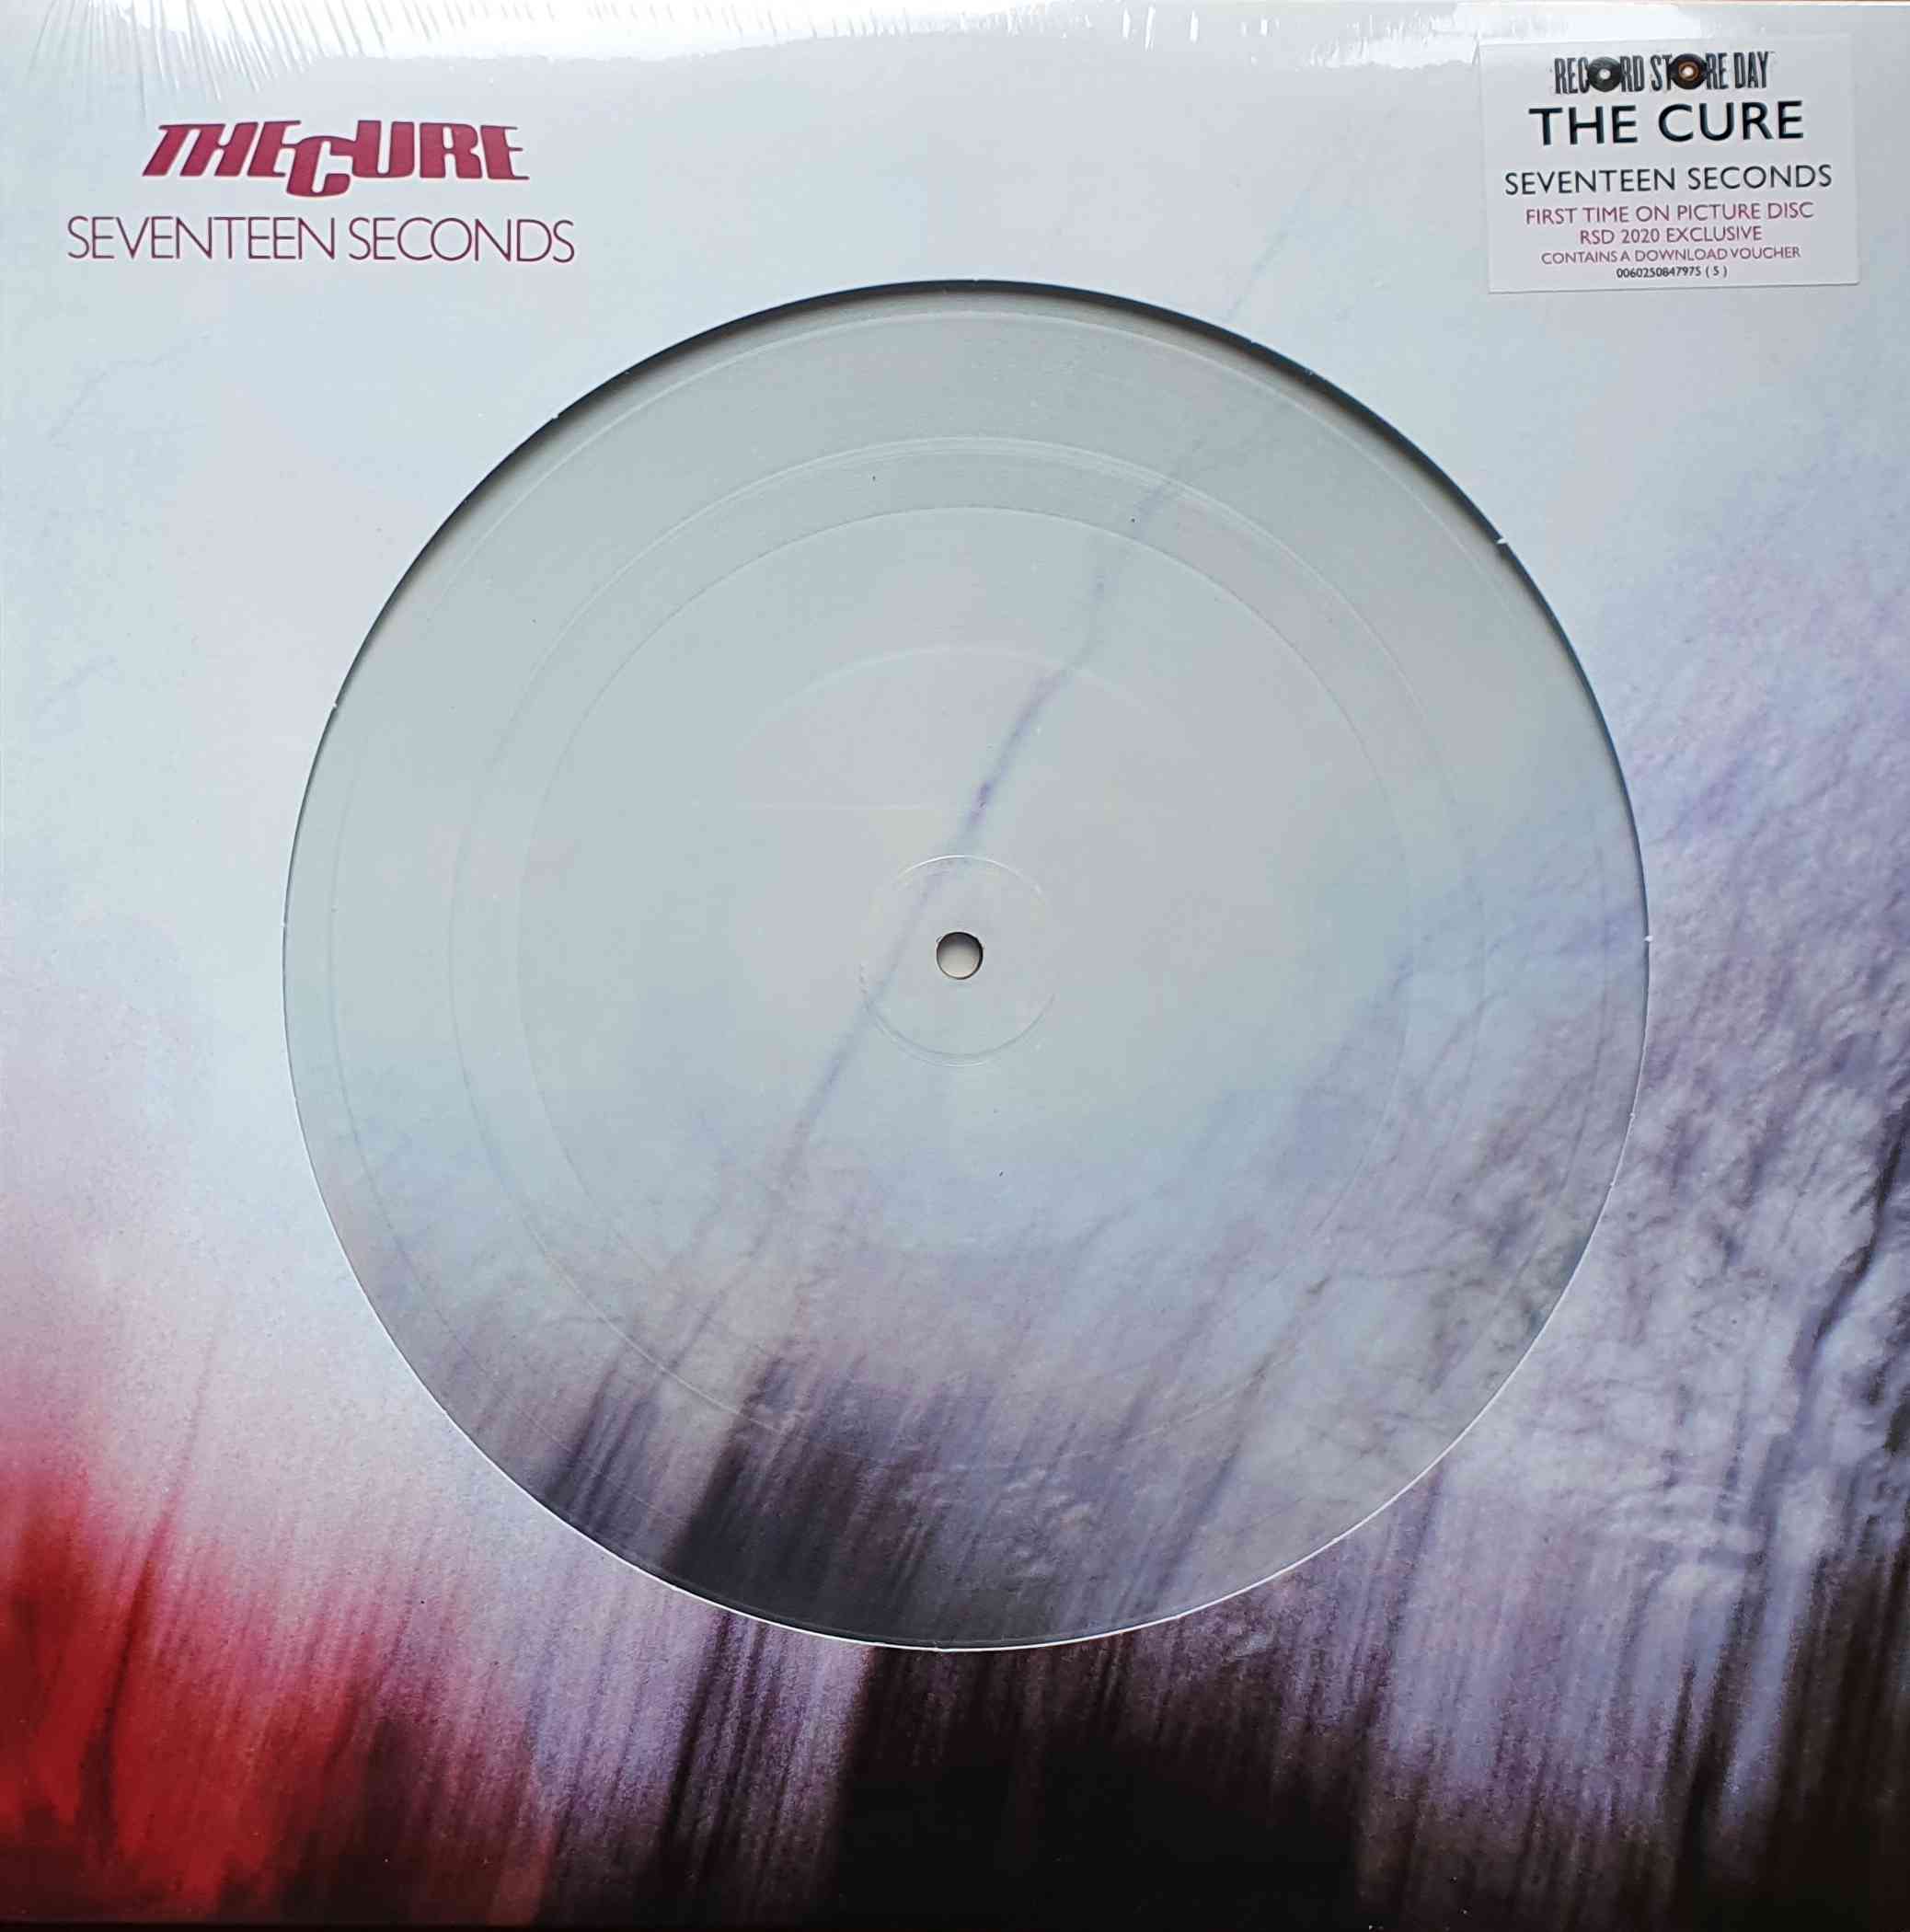 Picture of 00602508479755 Seventeen seconds - Limited edition picture discs - Record Store Day 2020 by artist The Cure from The Stranglers albums